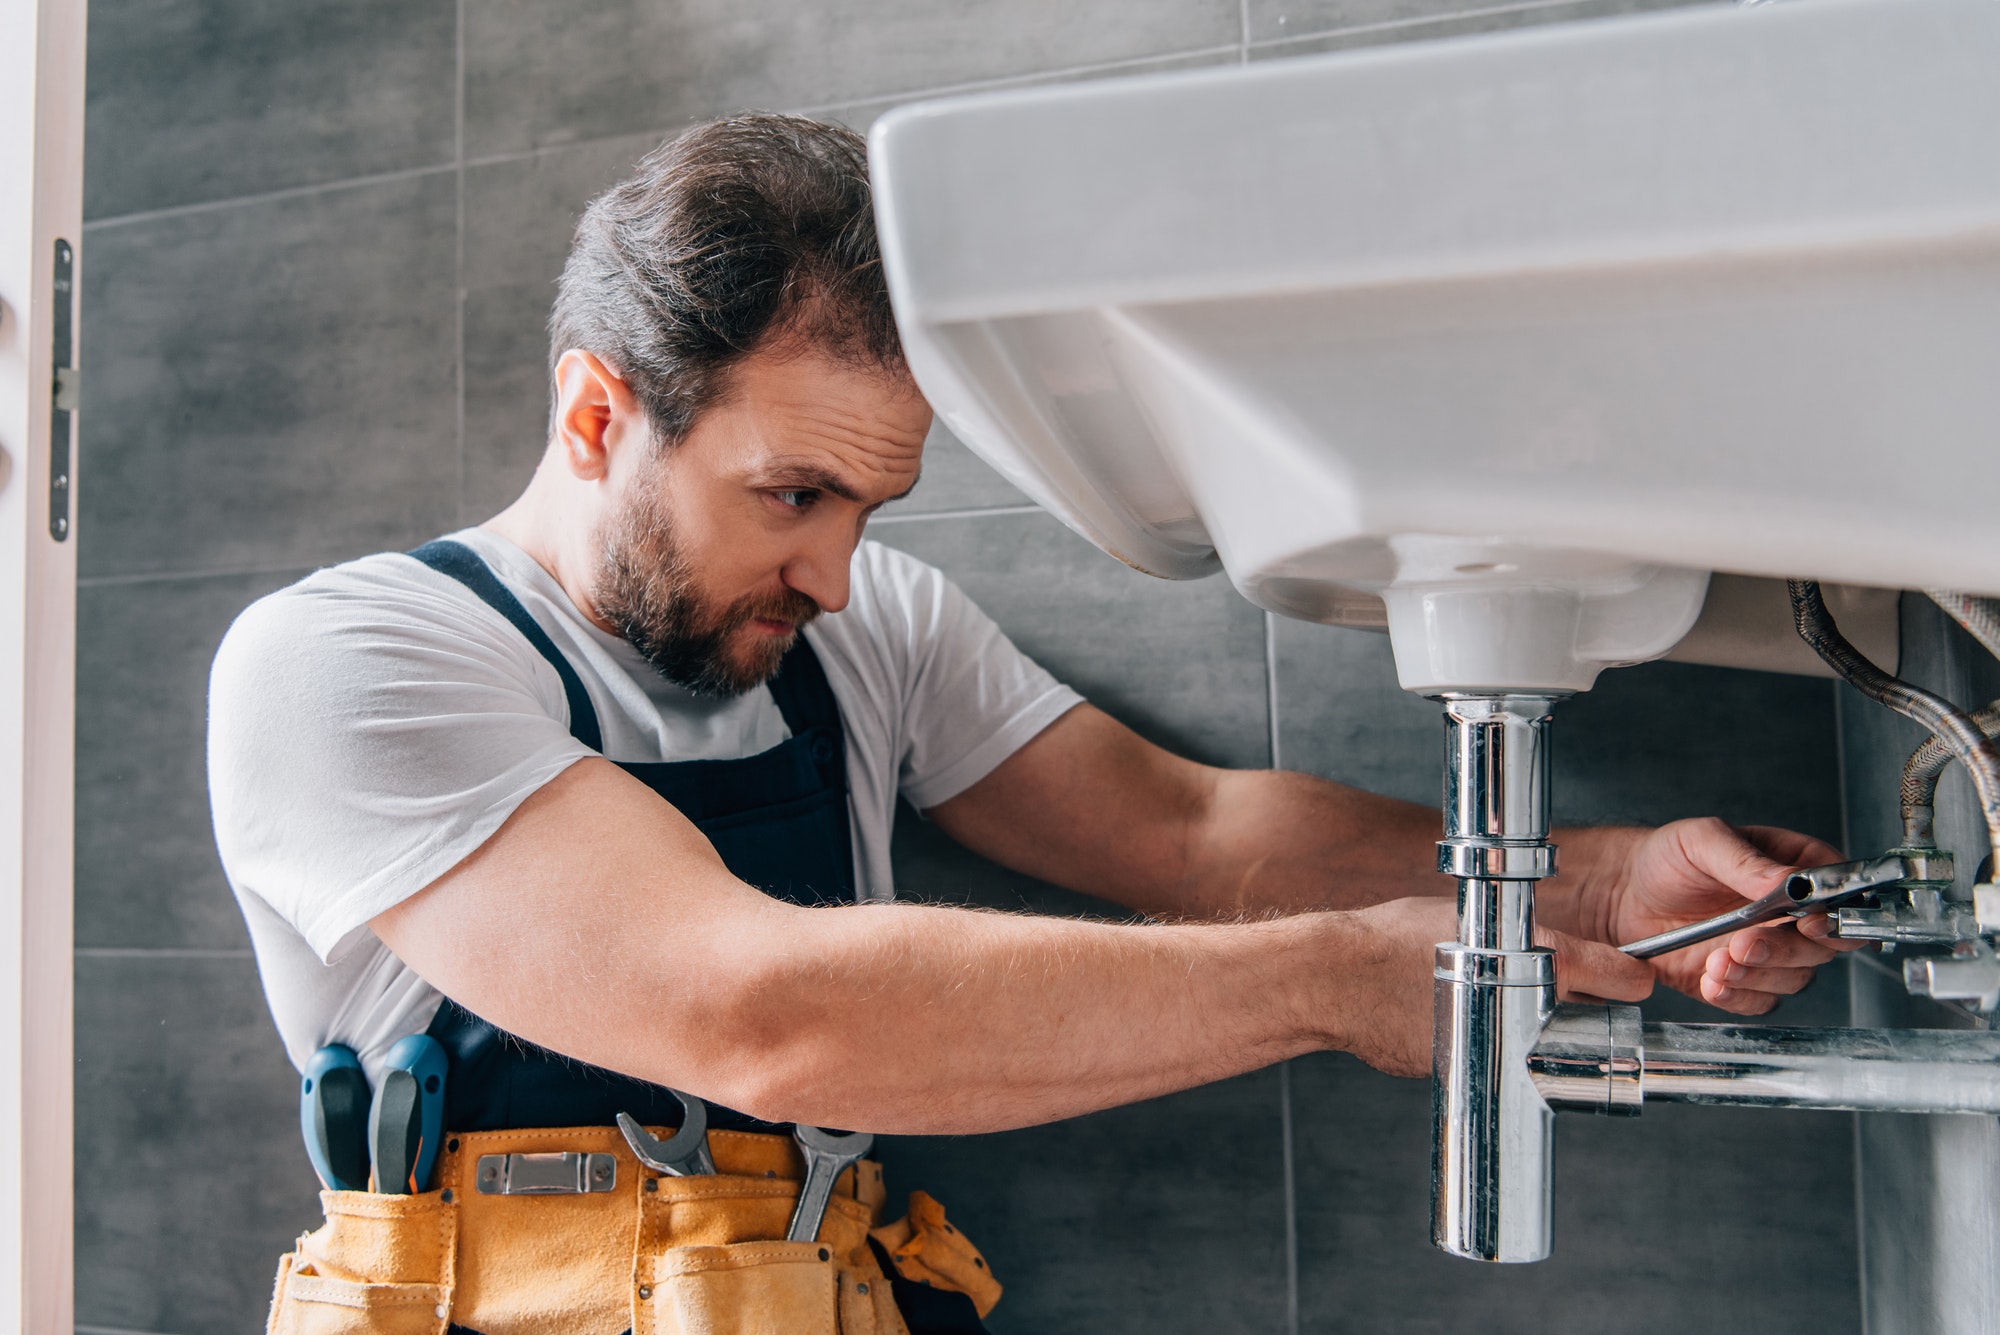 Plumbing Service Bend OR Can Prevent Costly Issues